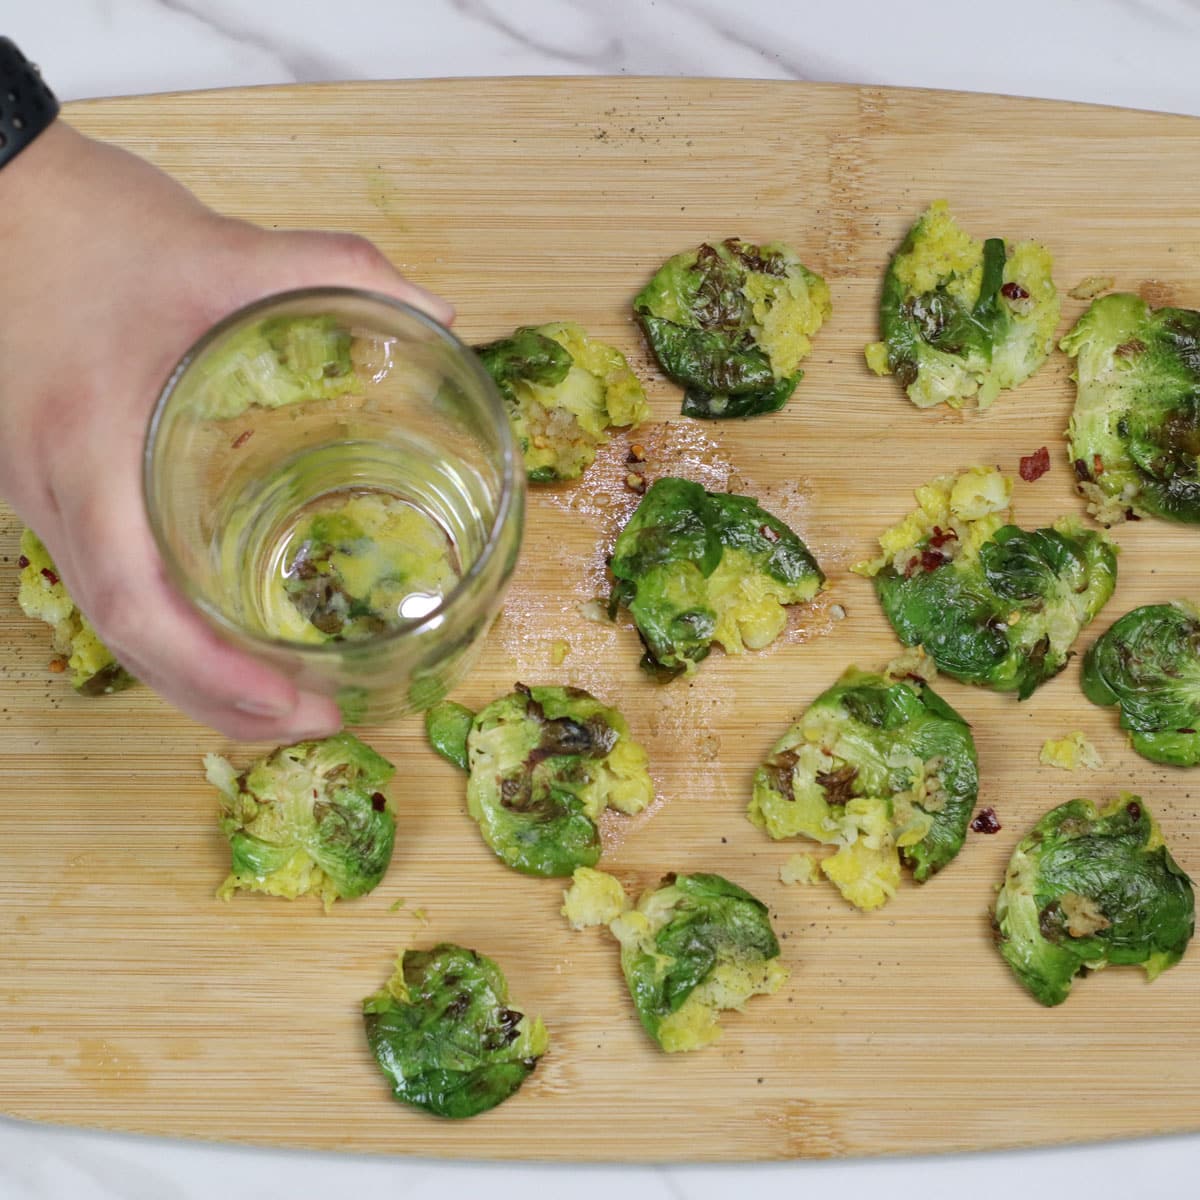 Smashing Brussels sprouts with glass